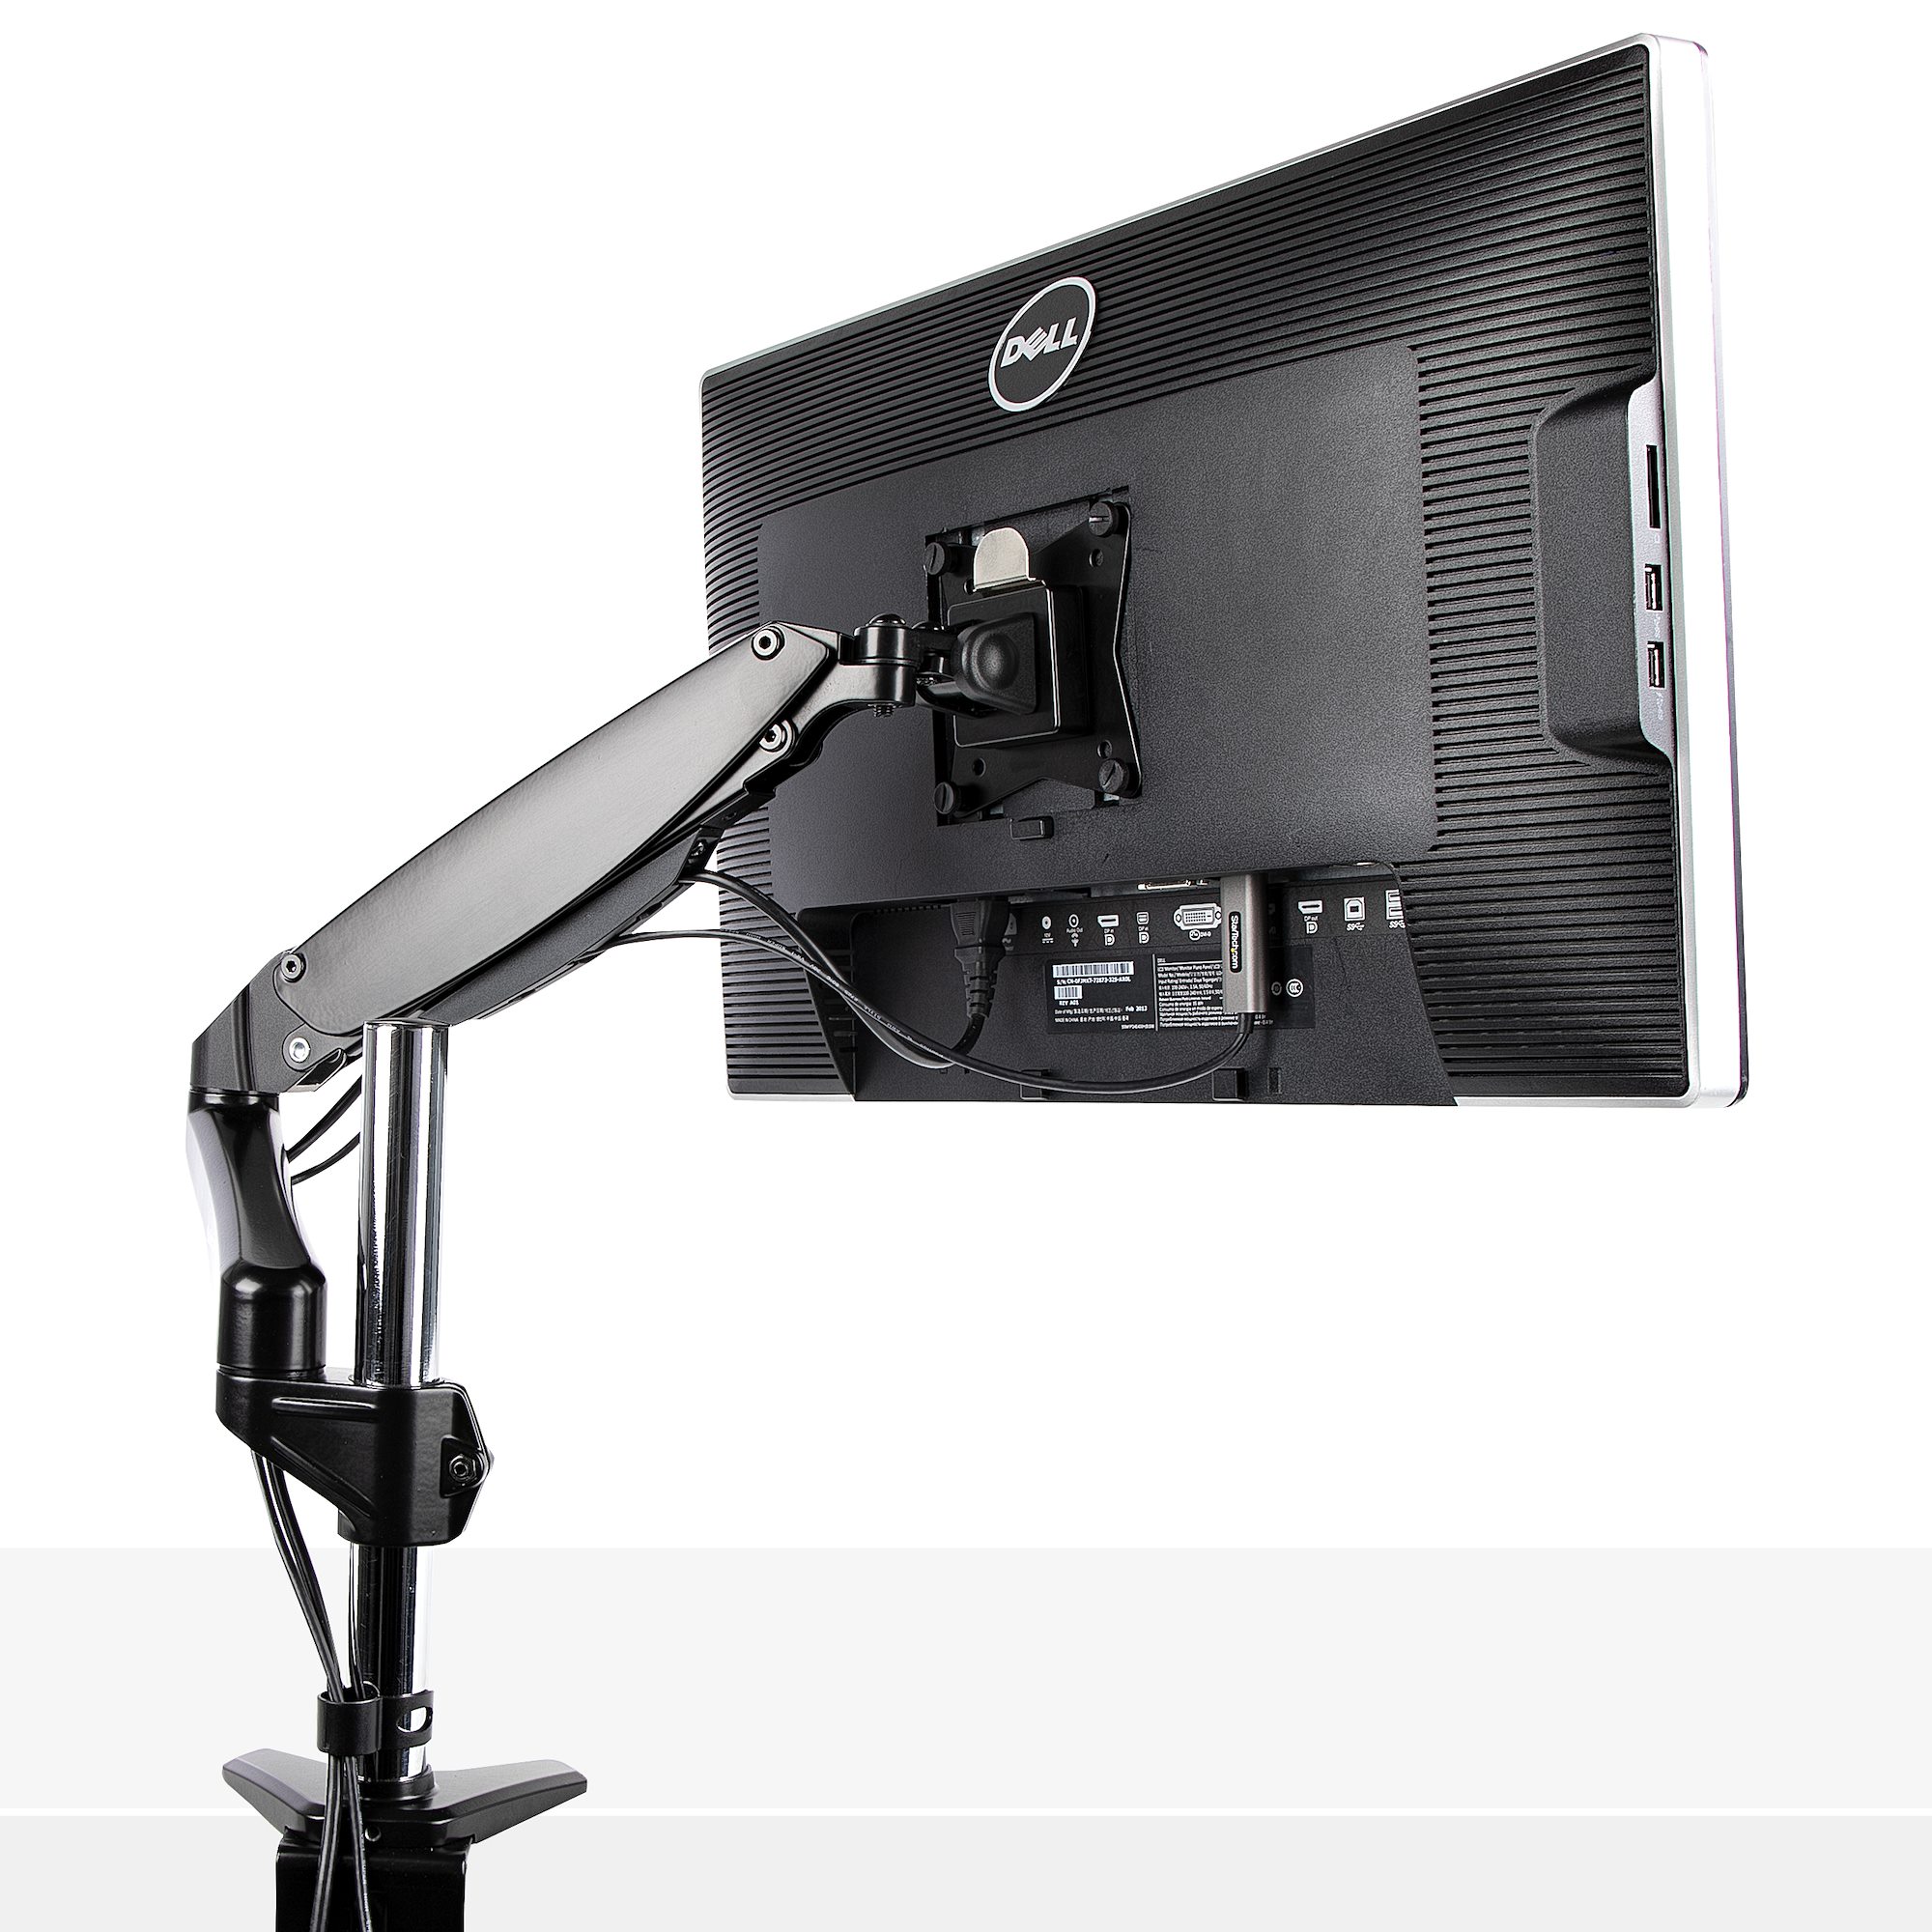 Desk Mount Monitor Arm for Single VESA Display up to 32 or 49 Ultrawide  (17.6lb/8kg) - Full Motion Articulating & Height Adjustable - C-Clamp